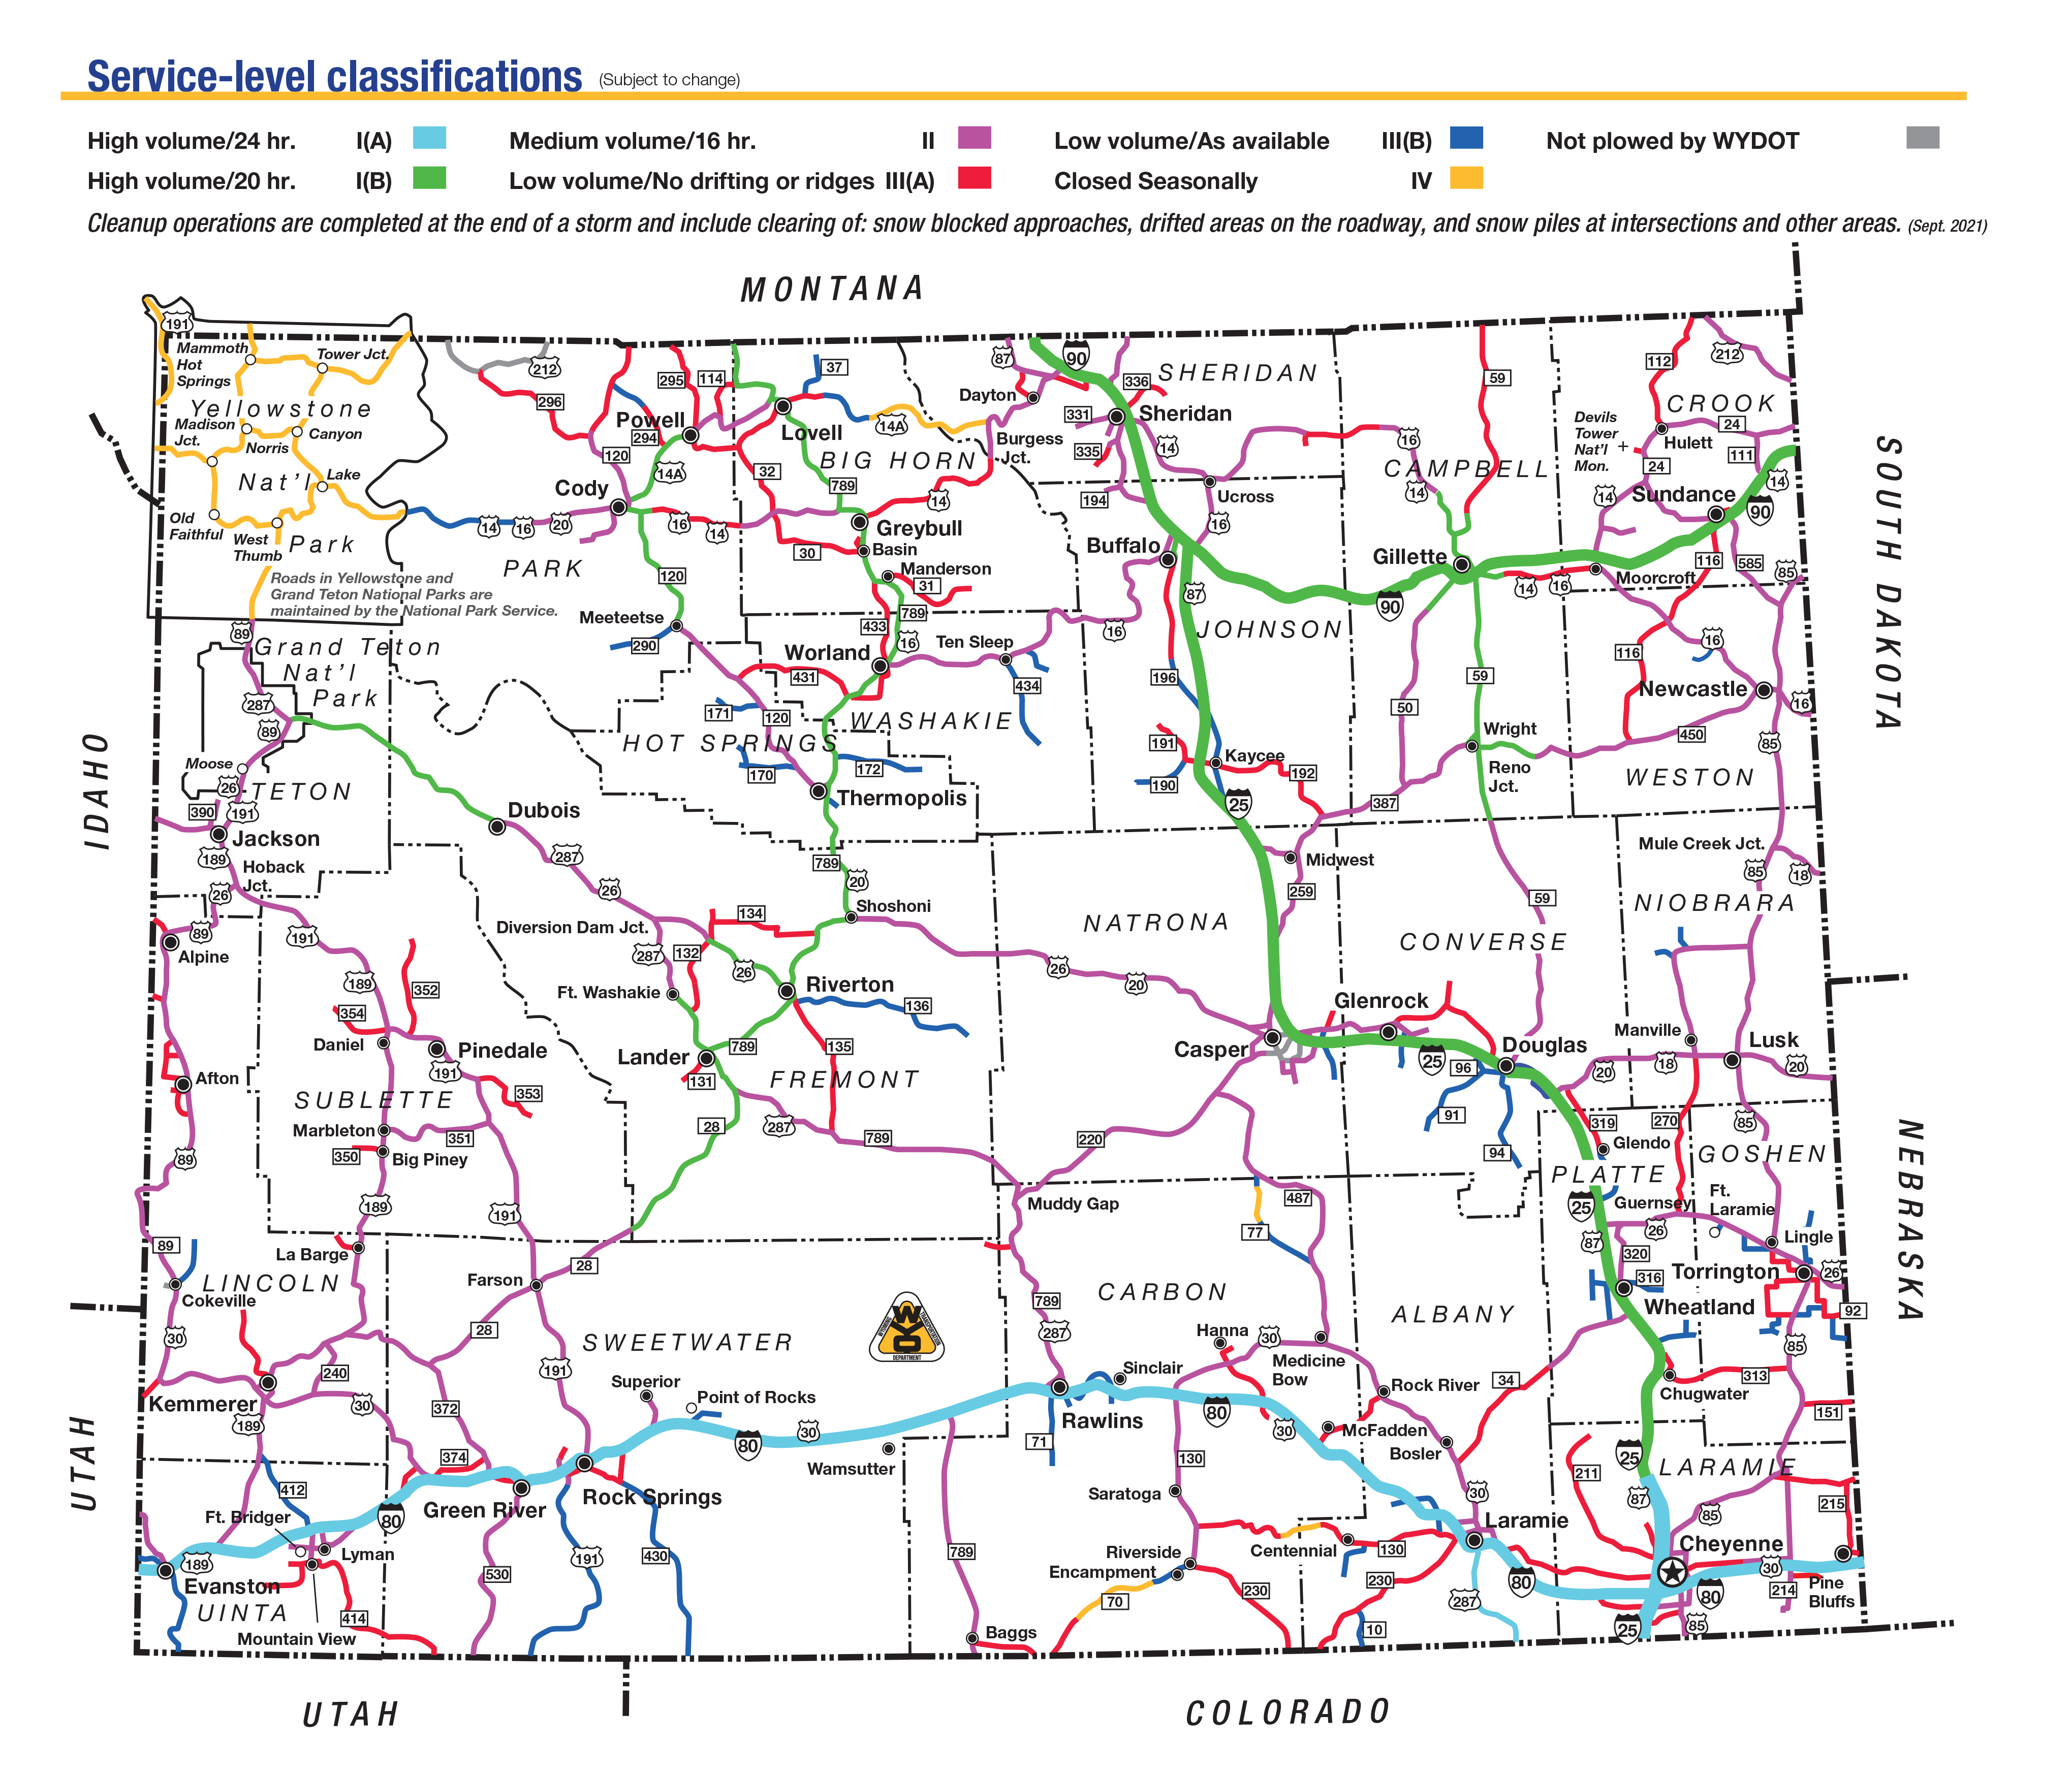 Snow plow priority map with legend_sfs_v2021.jpg (Snow plow priority map with legend_sfs_v2021)